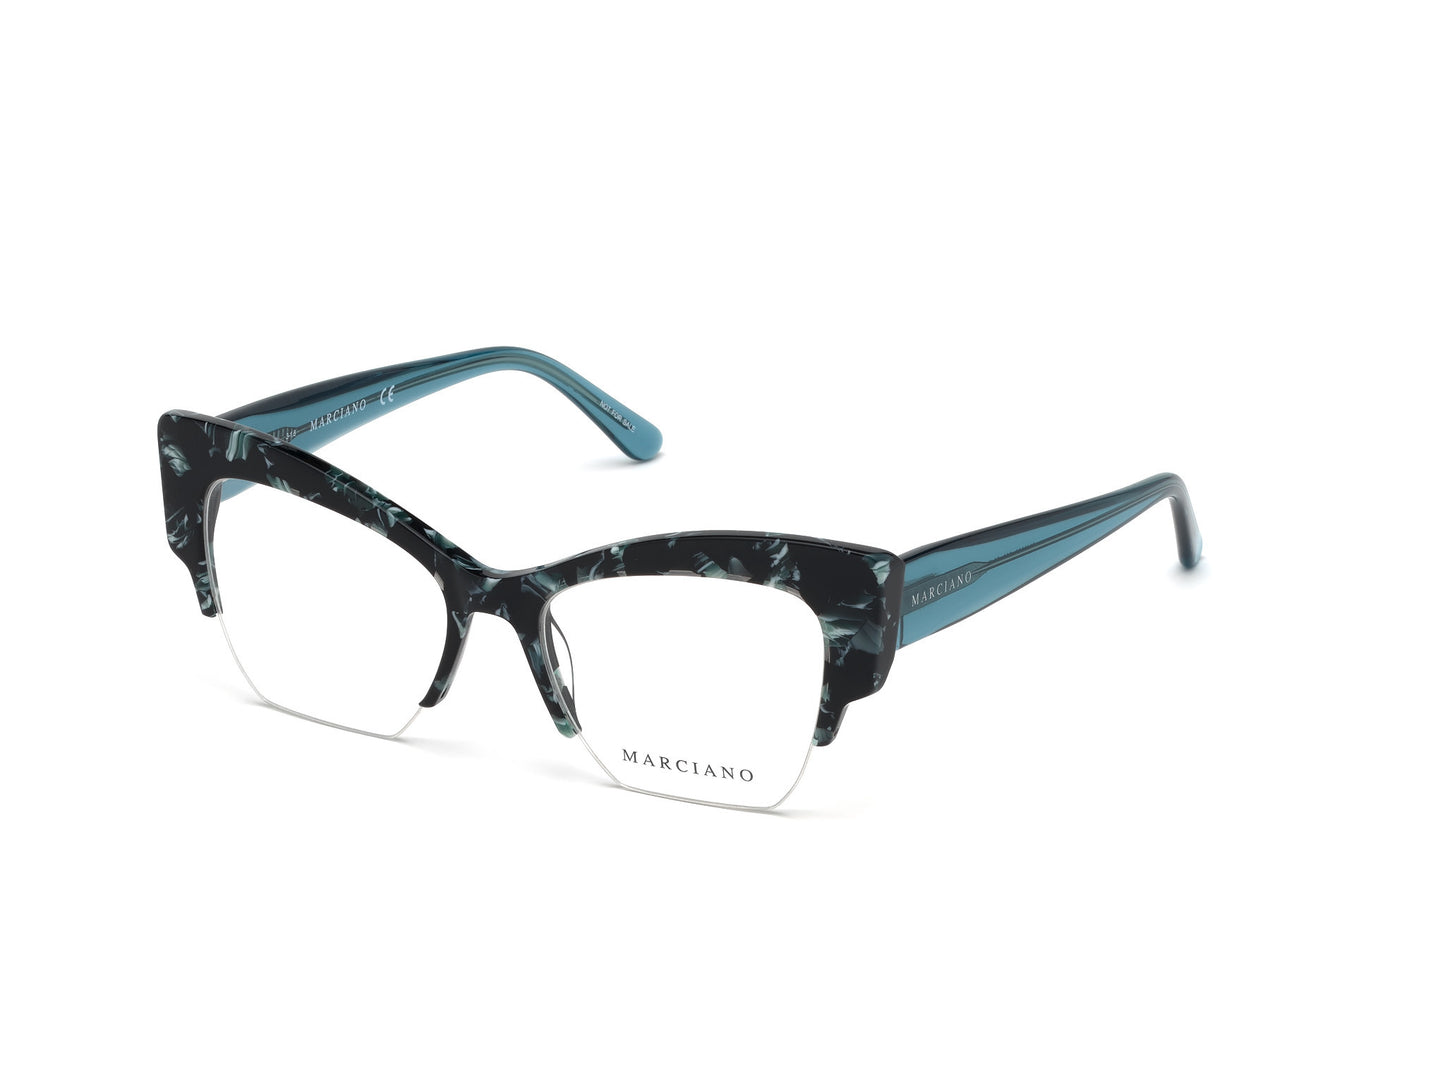 Guess By Marciano GM0329 Geometric Eyeglasses 089-089 - Turquoise